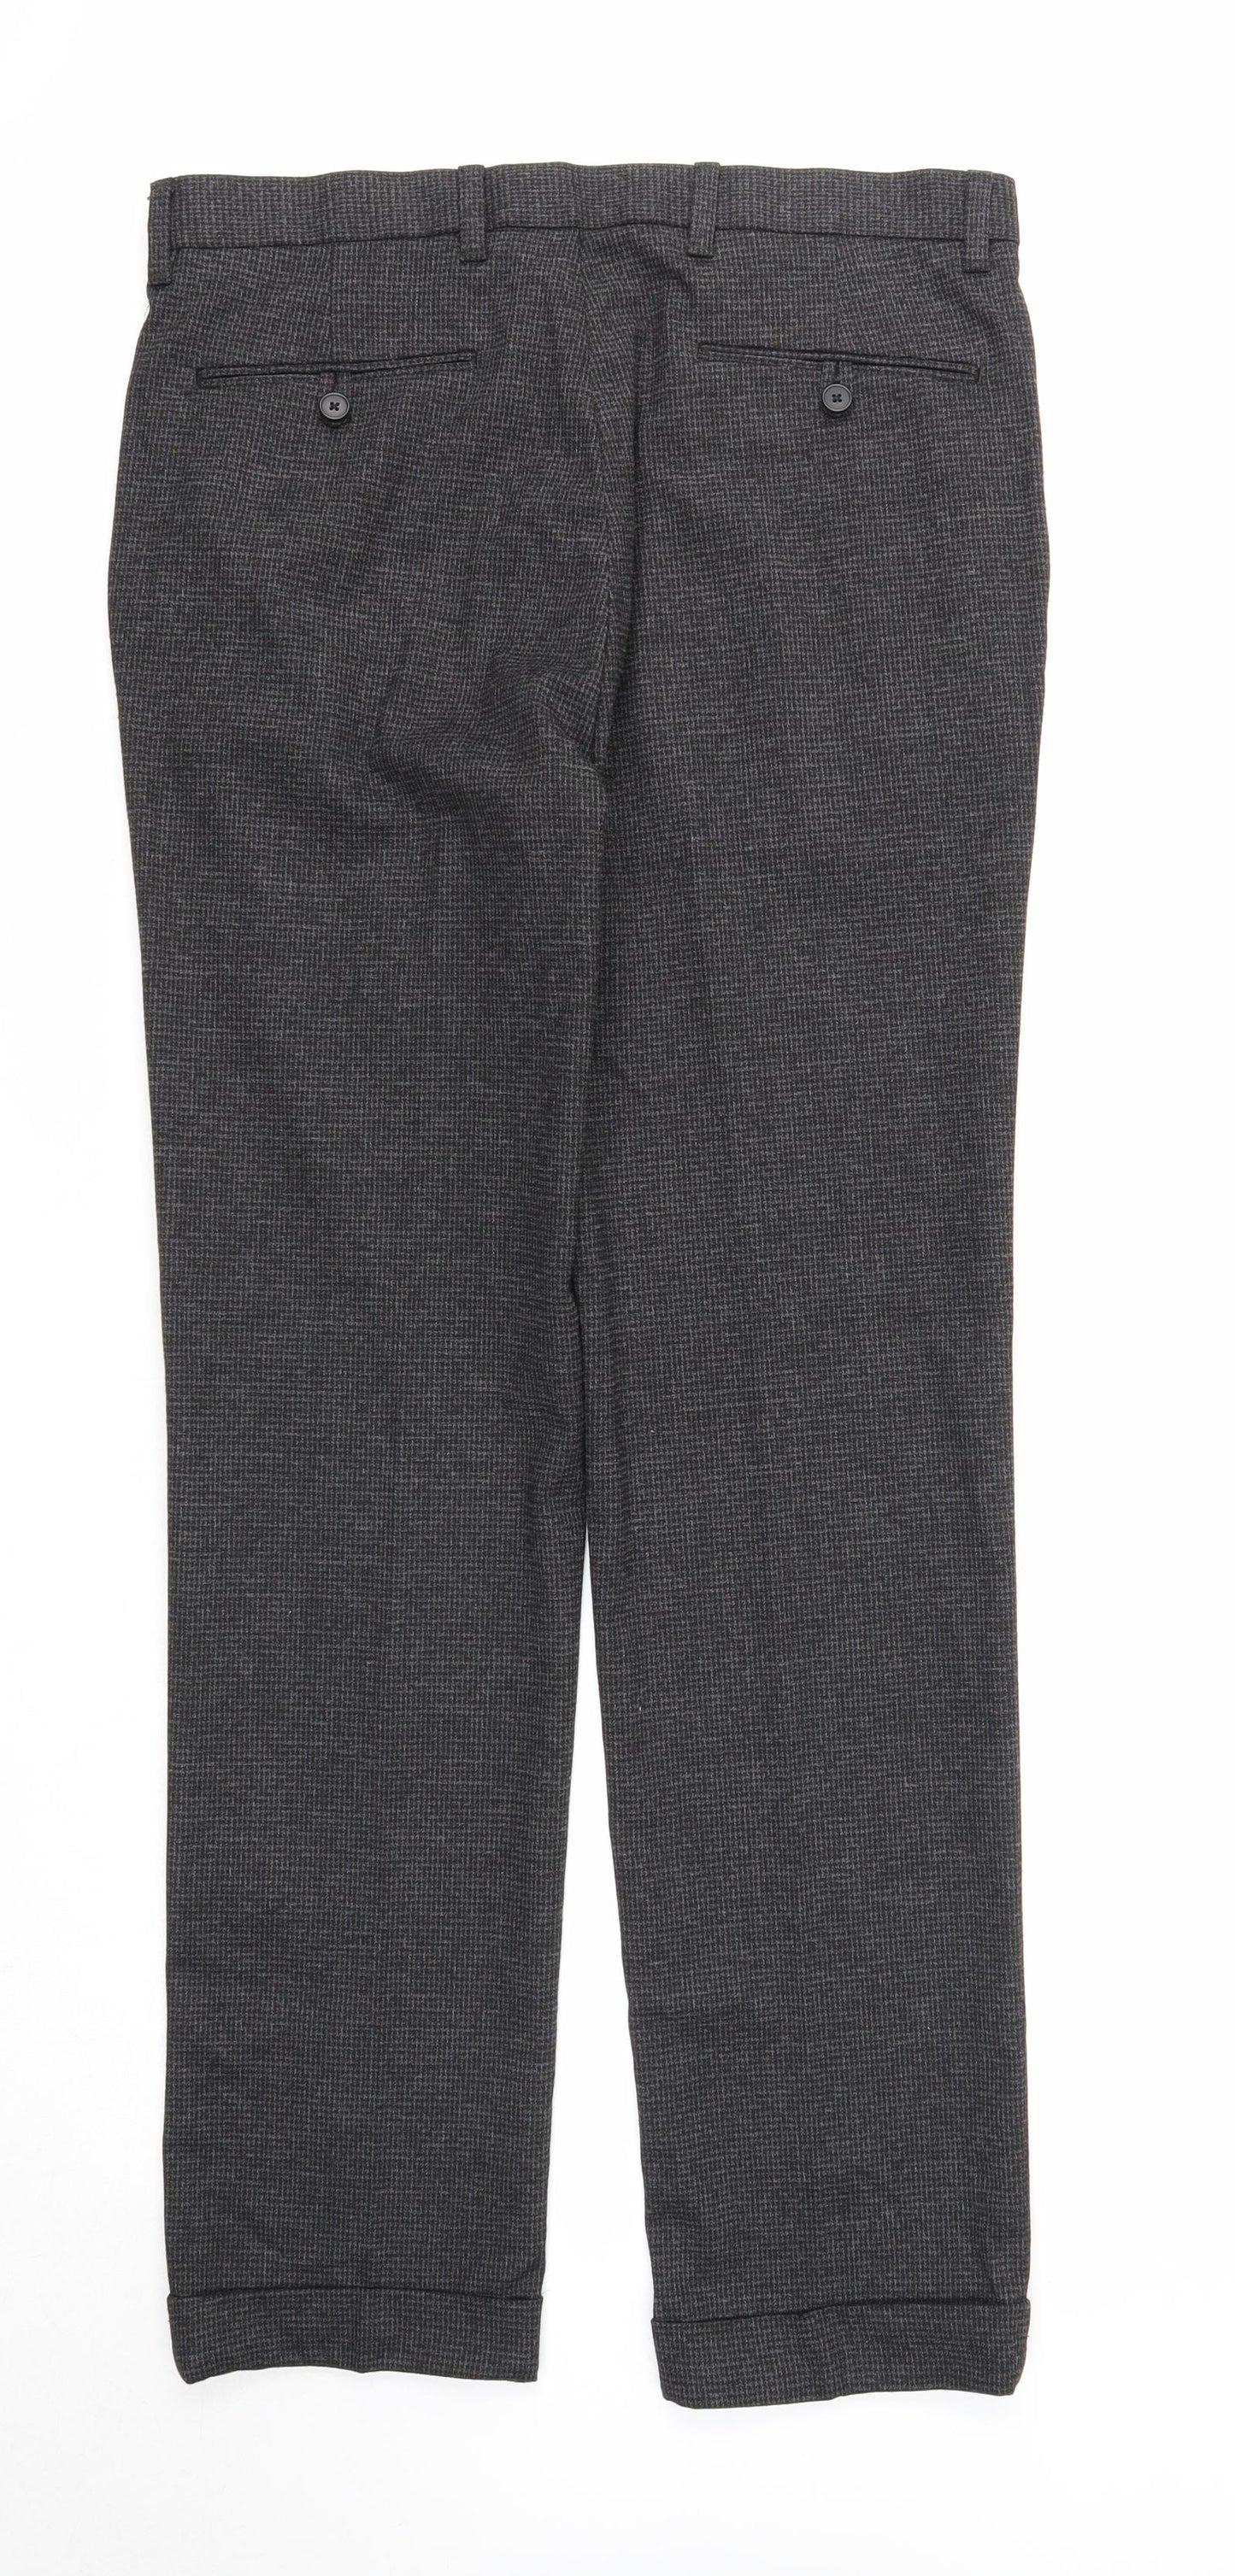 NEXT Mens Black Polyester Dress Pants Trousers Size 32 in L33 in Regular Zip